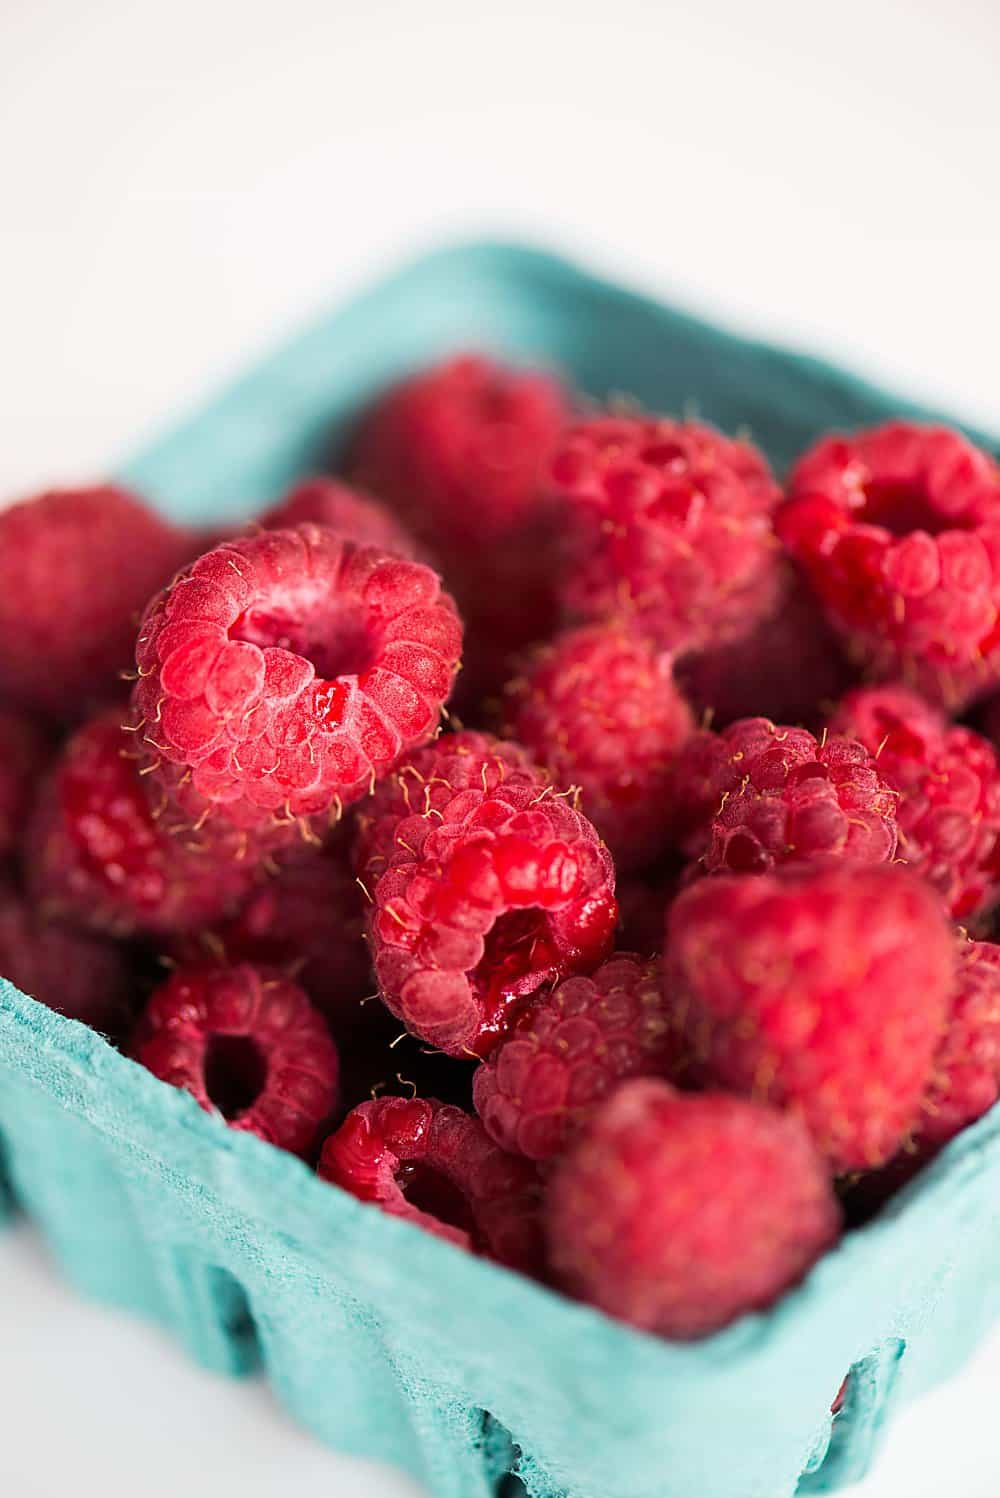 A close up of raspberries